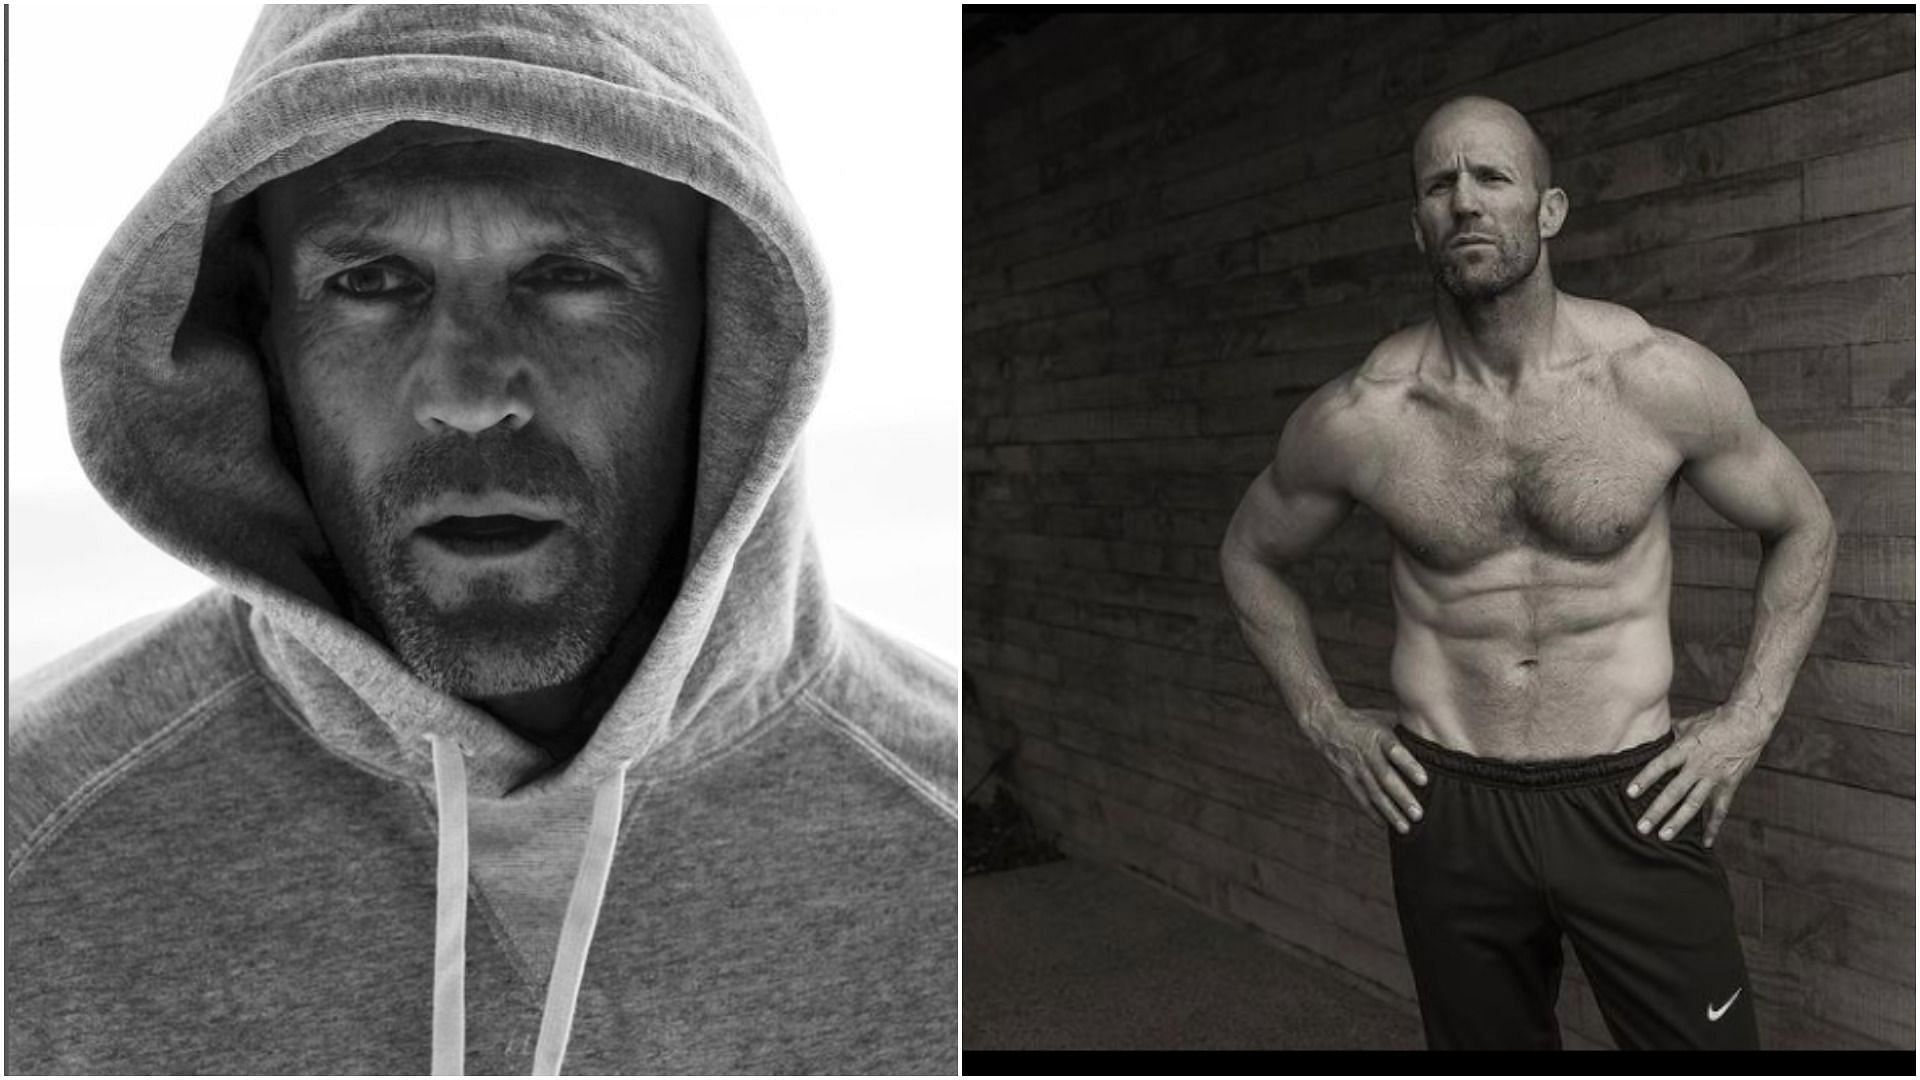 Jason Statham keeps his diet clean and simple by eating six meals per day. (Image via IG @ jasonstatham )